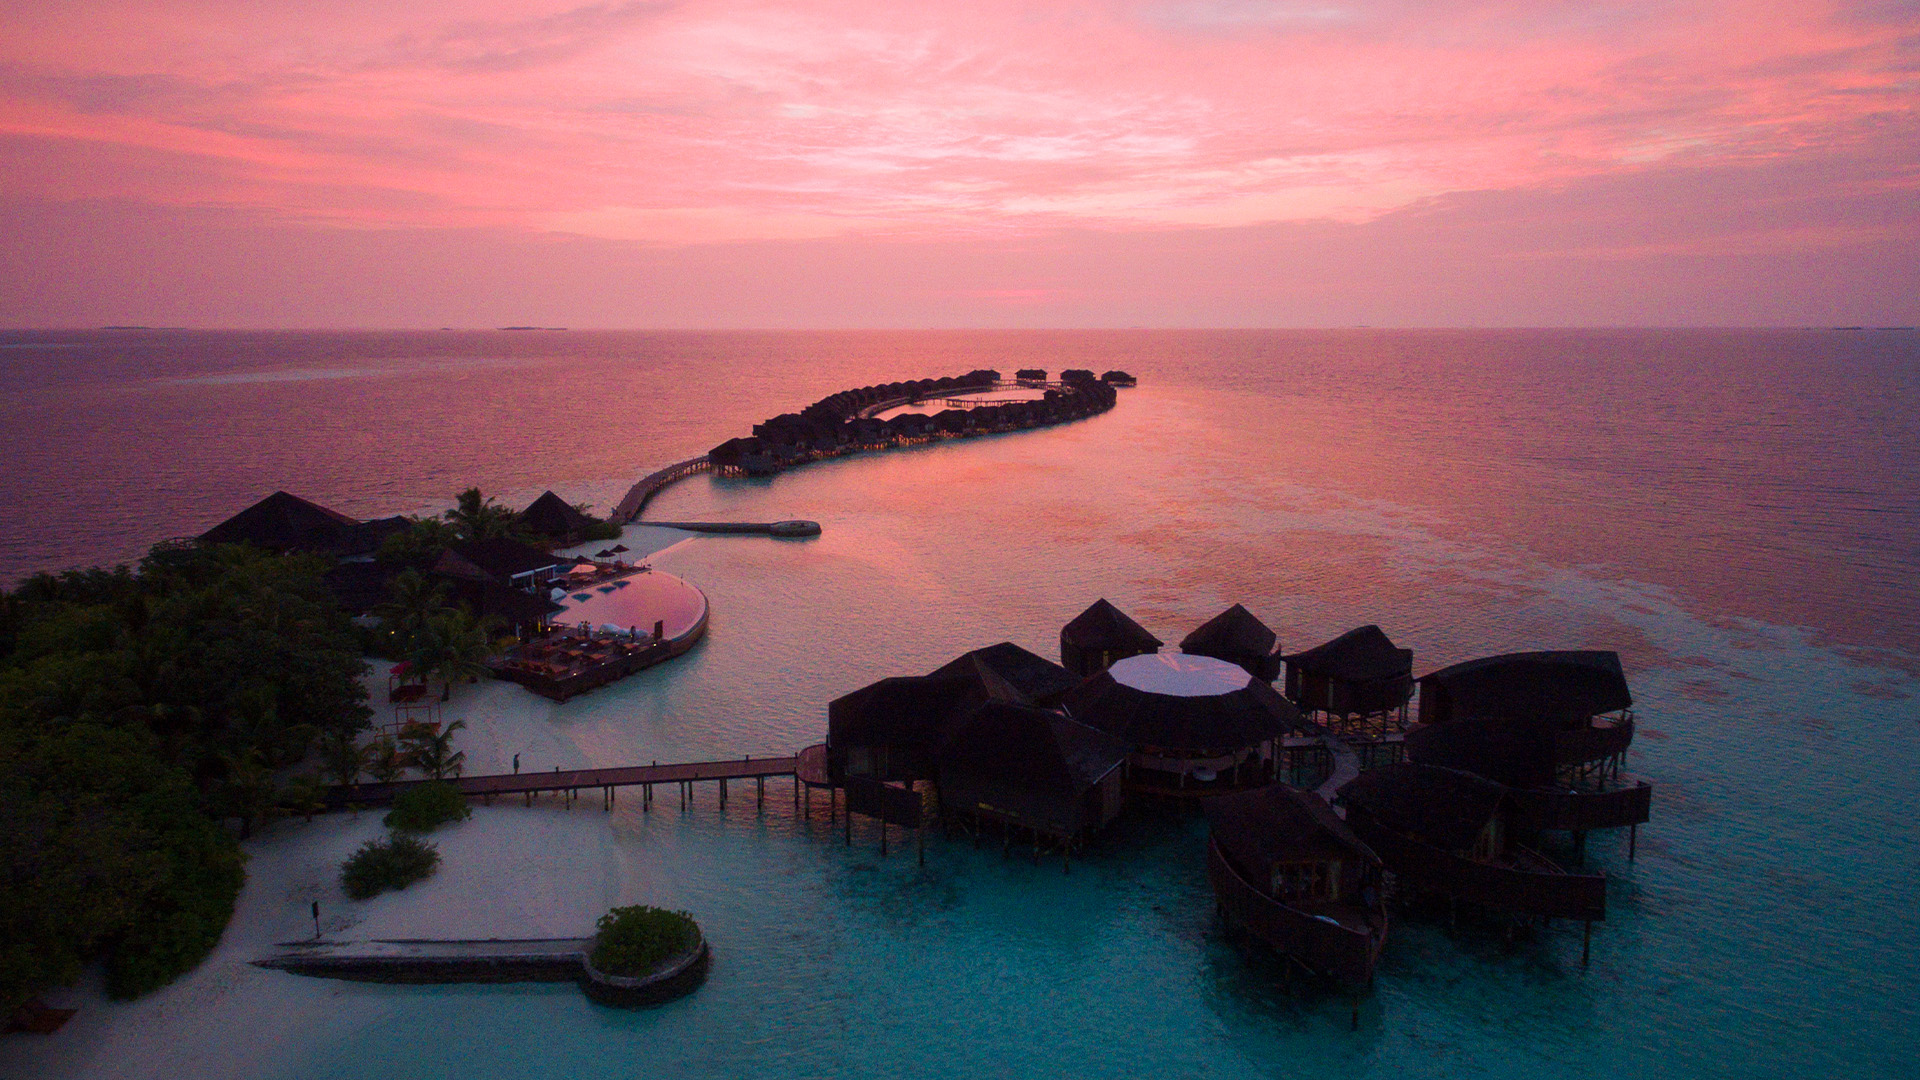 Sunset aerial view of Lily Beach Resort & Spa's over water villas.